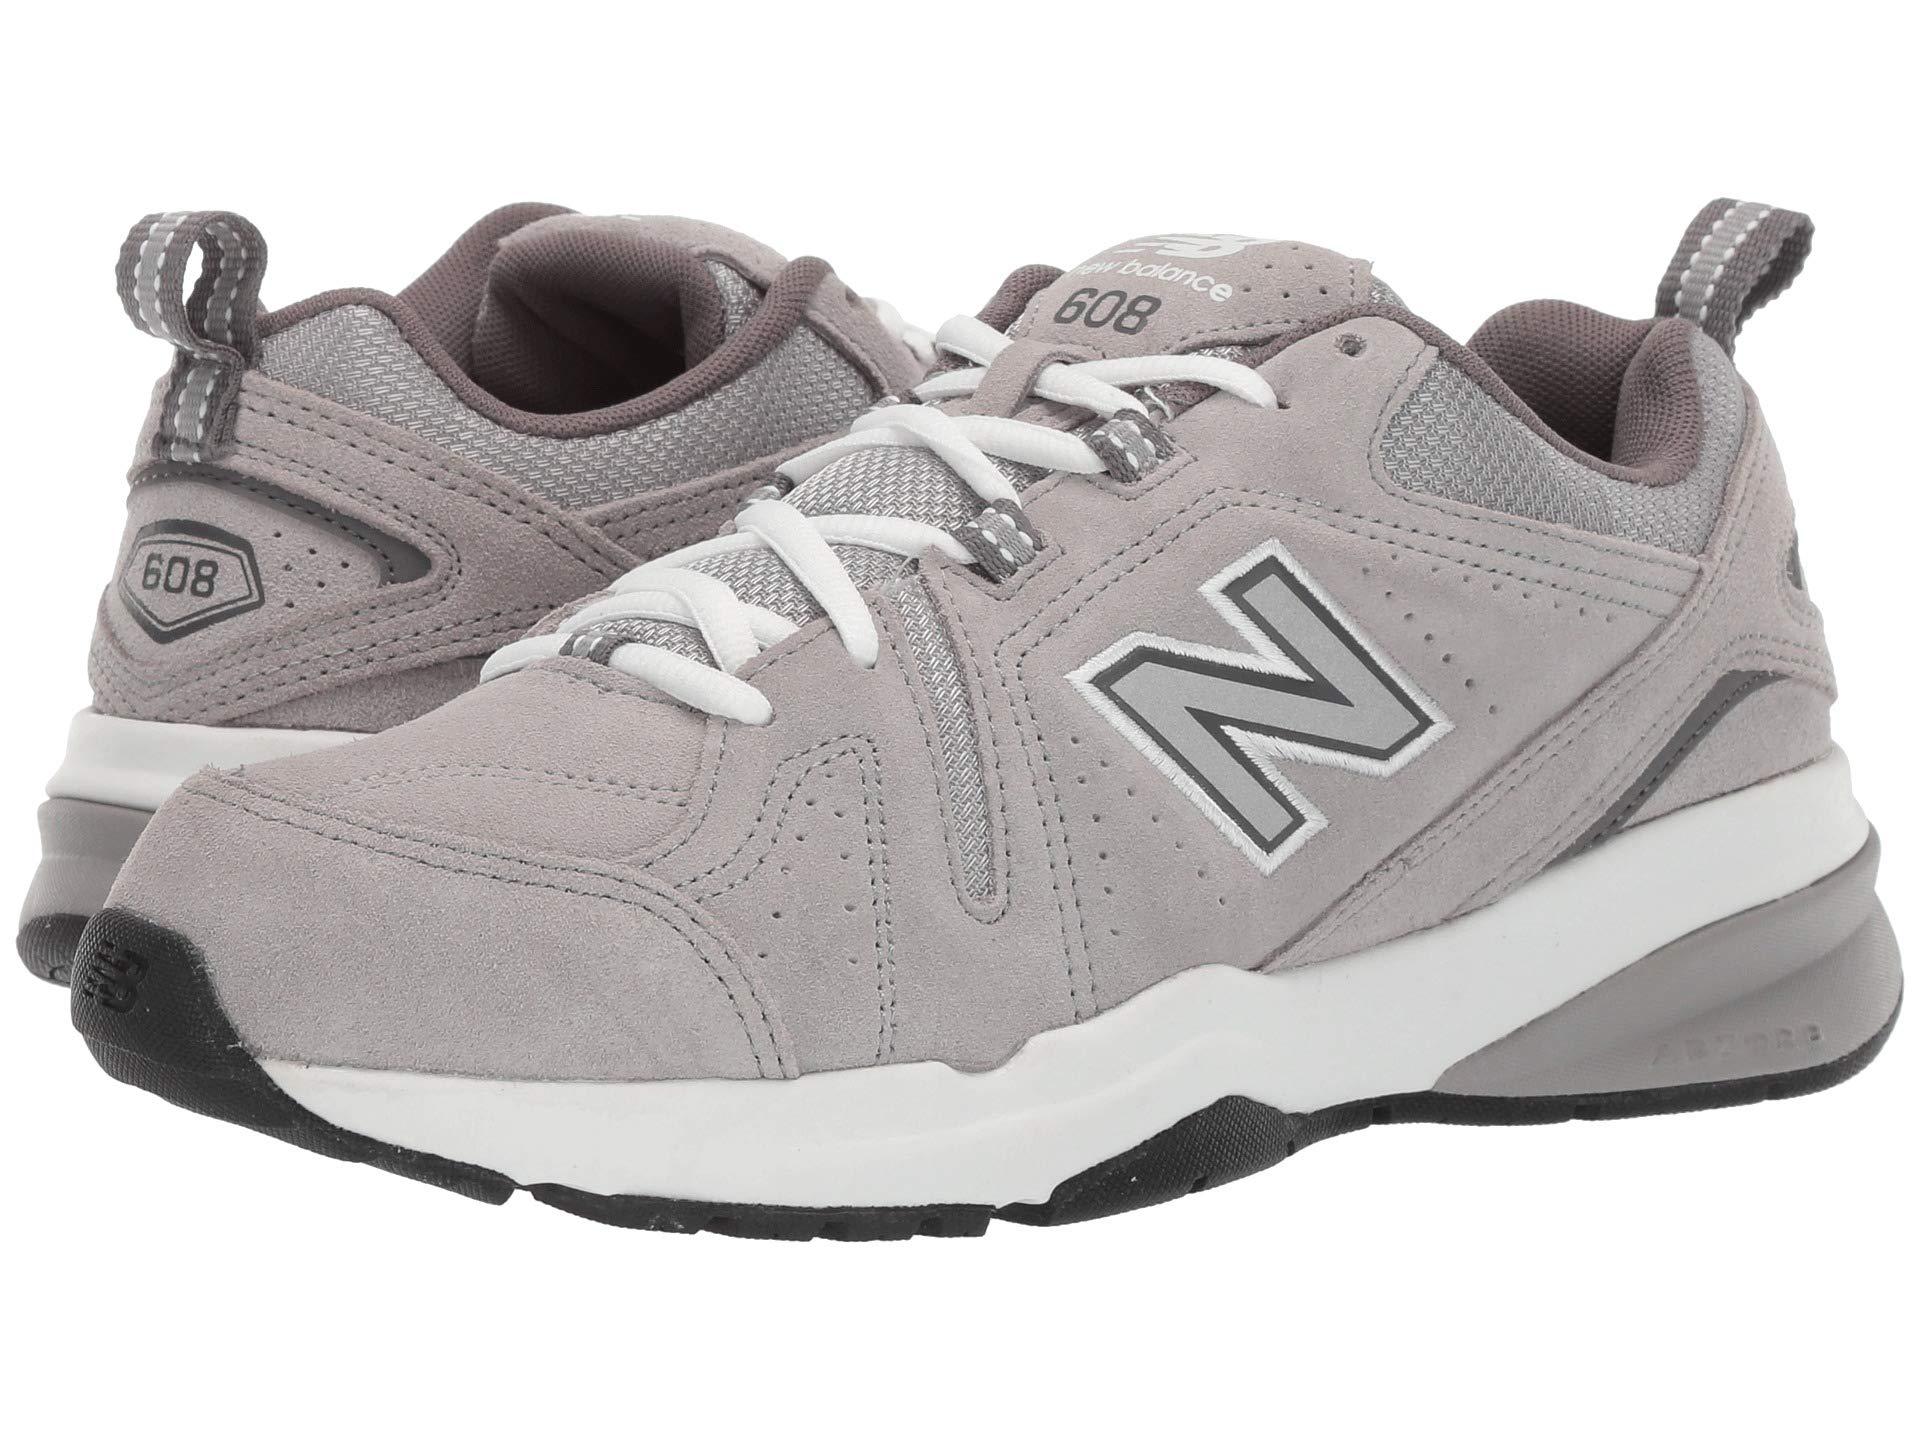 New Balance Suede 608v5 in Gray for Men - Lyst